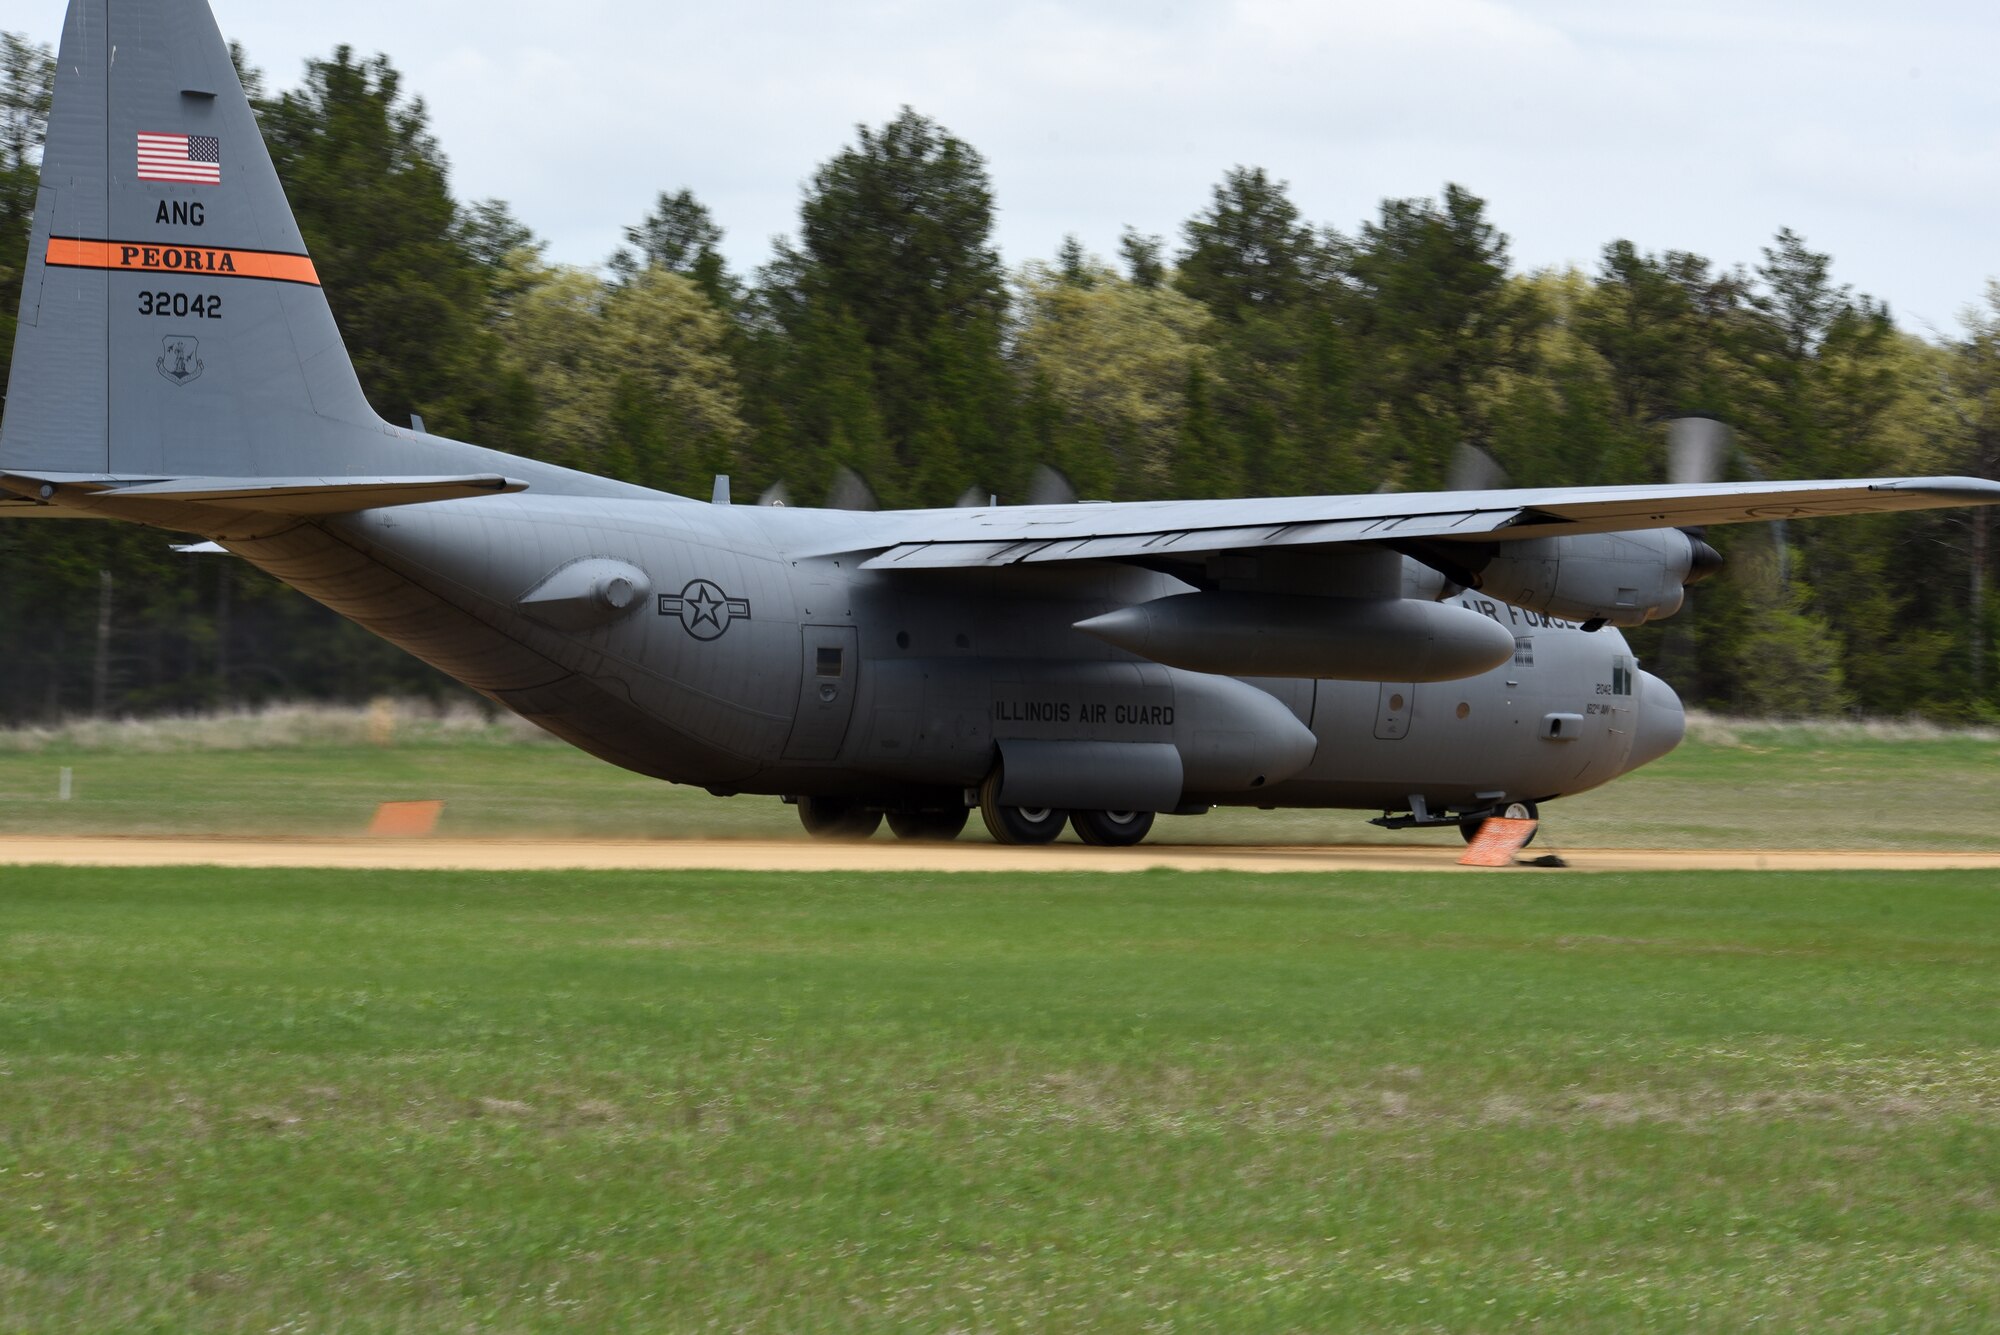 A C-130 Hercules from the 182nd Airlift Wing, Illinois Air National Guard, lands in the touchdown zone at Young Landing Zone at Fort McCoy, Wis. May 14, 2018. A number of pilots were qualifying to complete their unimproved landing certification. (U.S. Air National Guard photo by Master Sgt. Todd A. Pendleton)